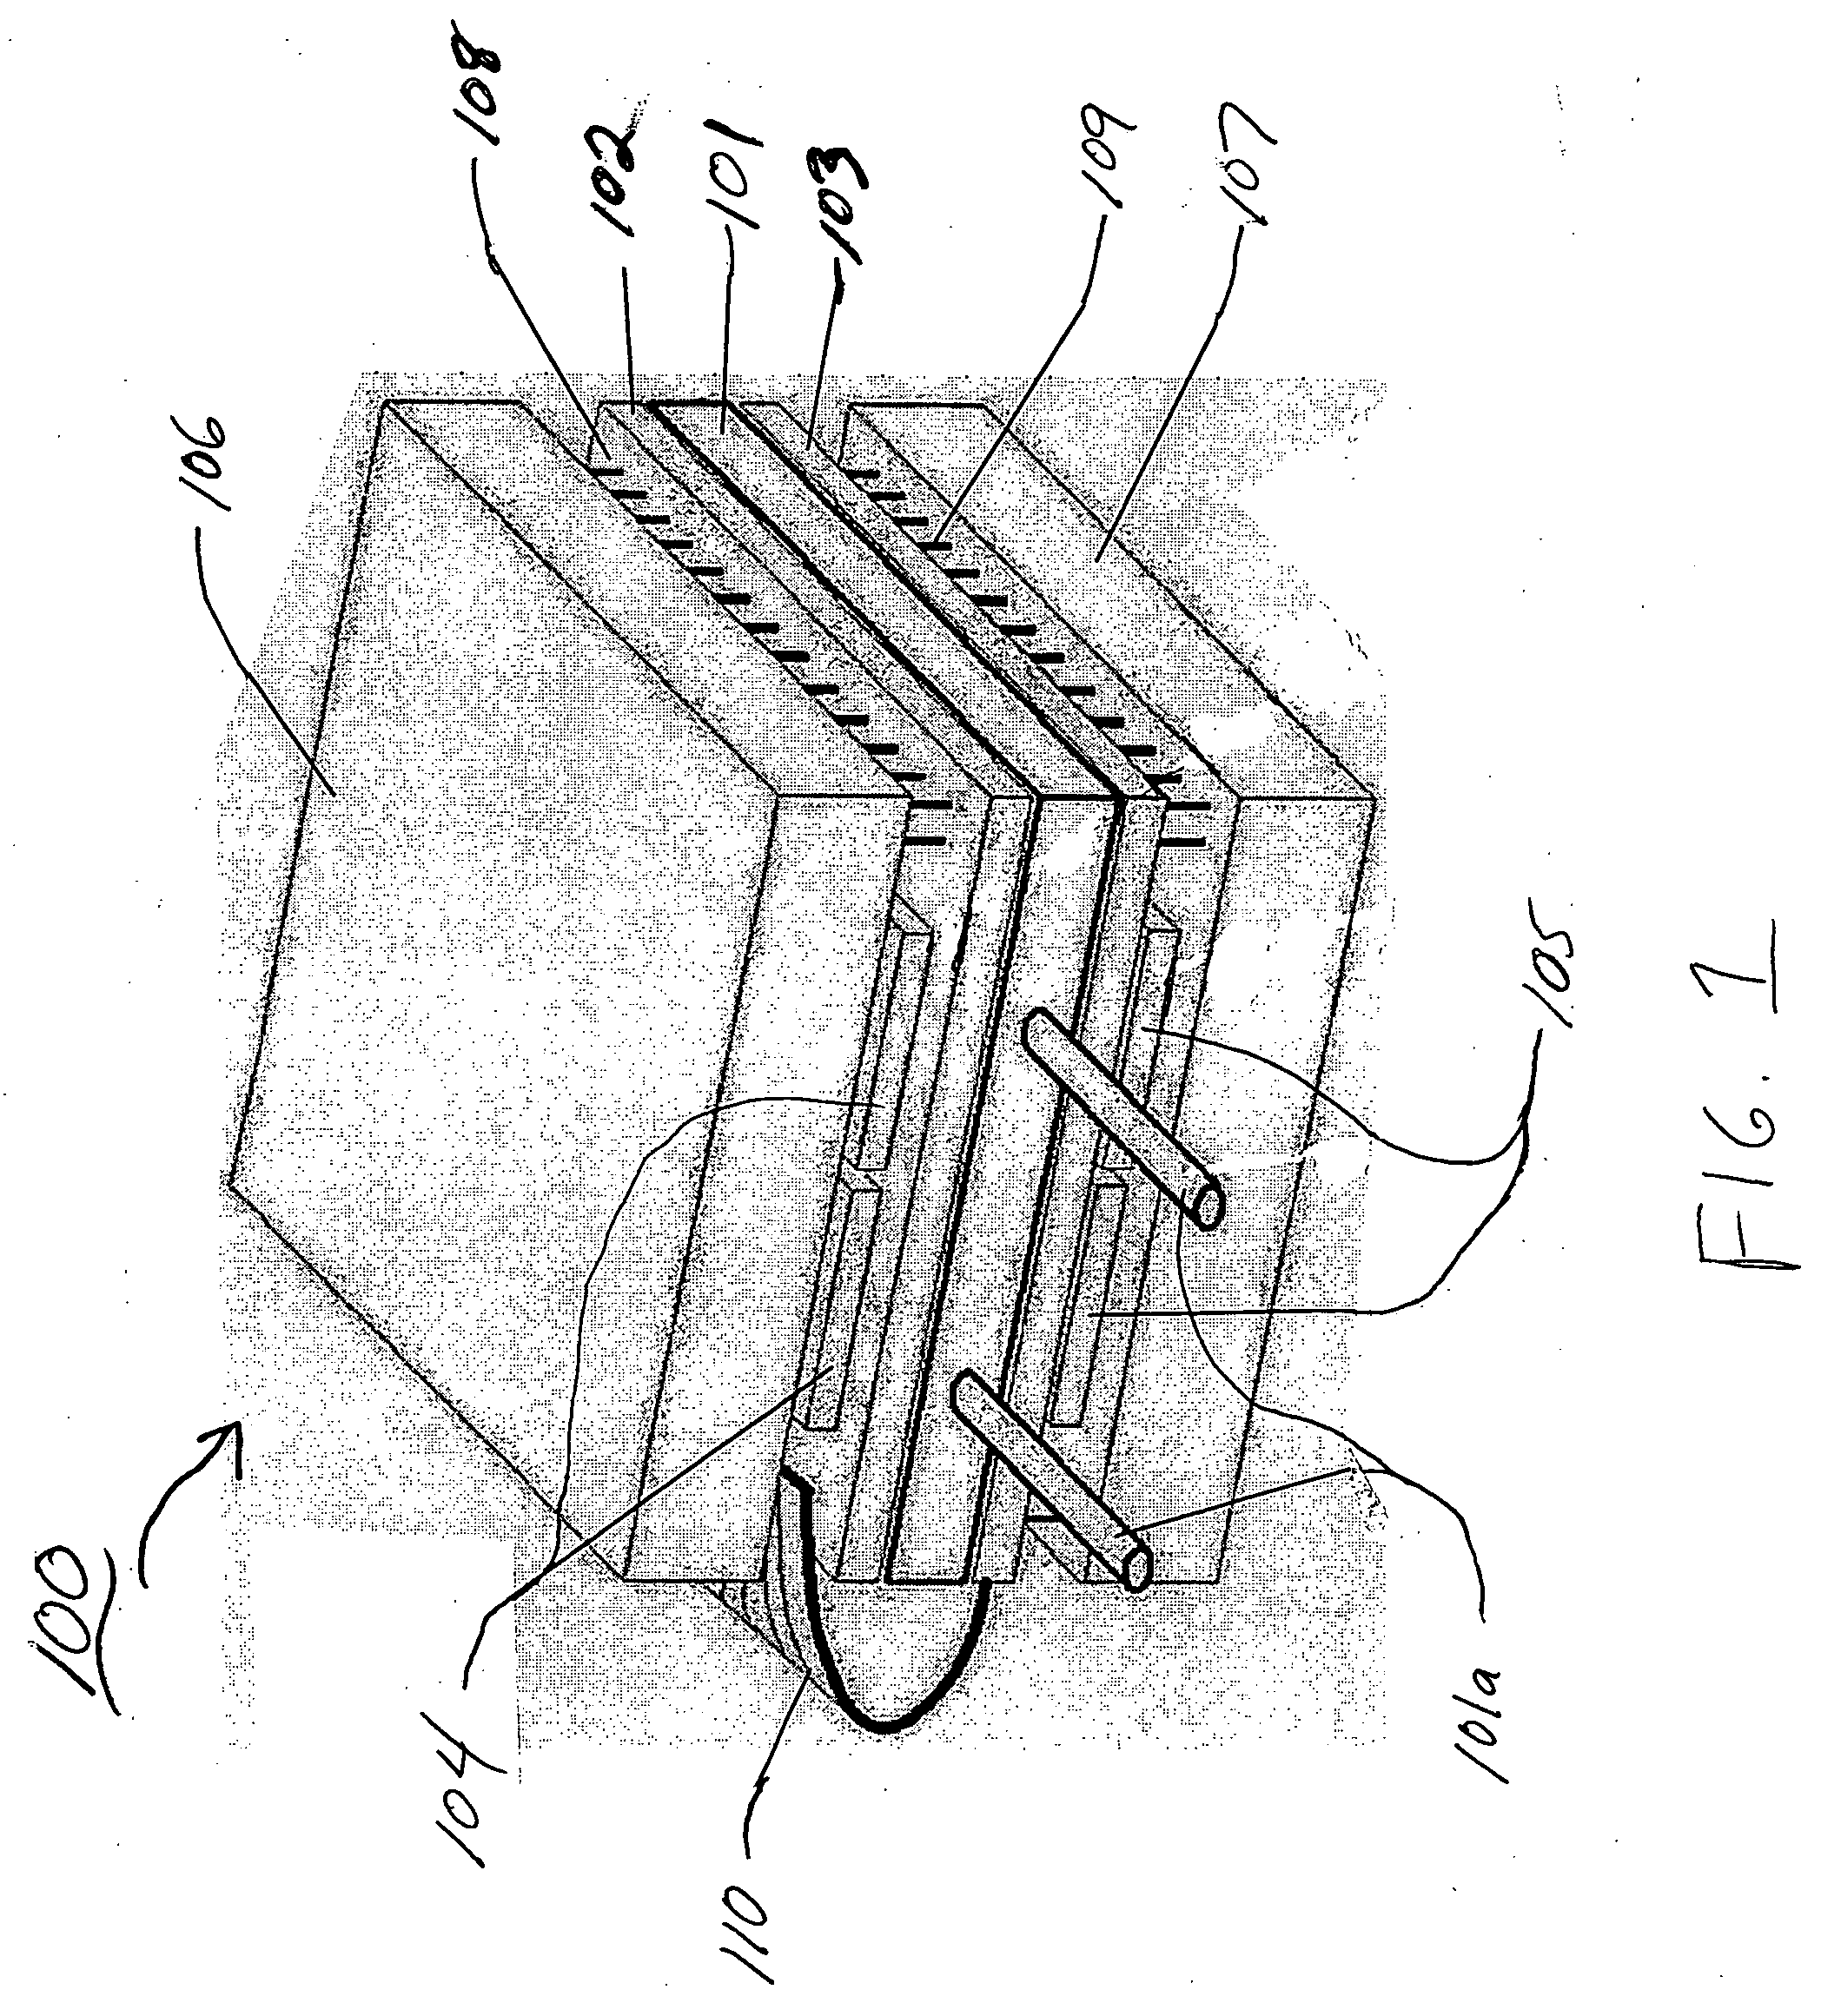 Apparatus and methods for cooling semiconductor integrated circuit chip packages